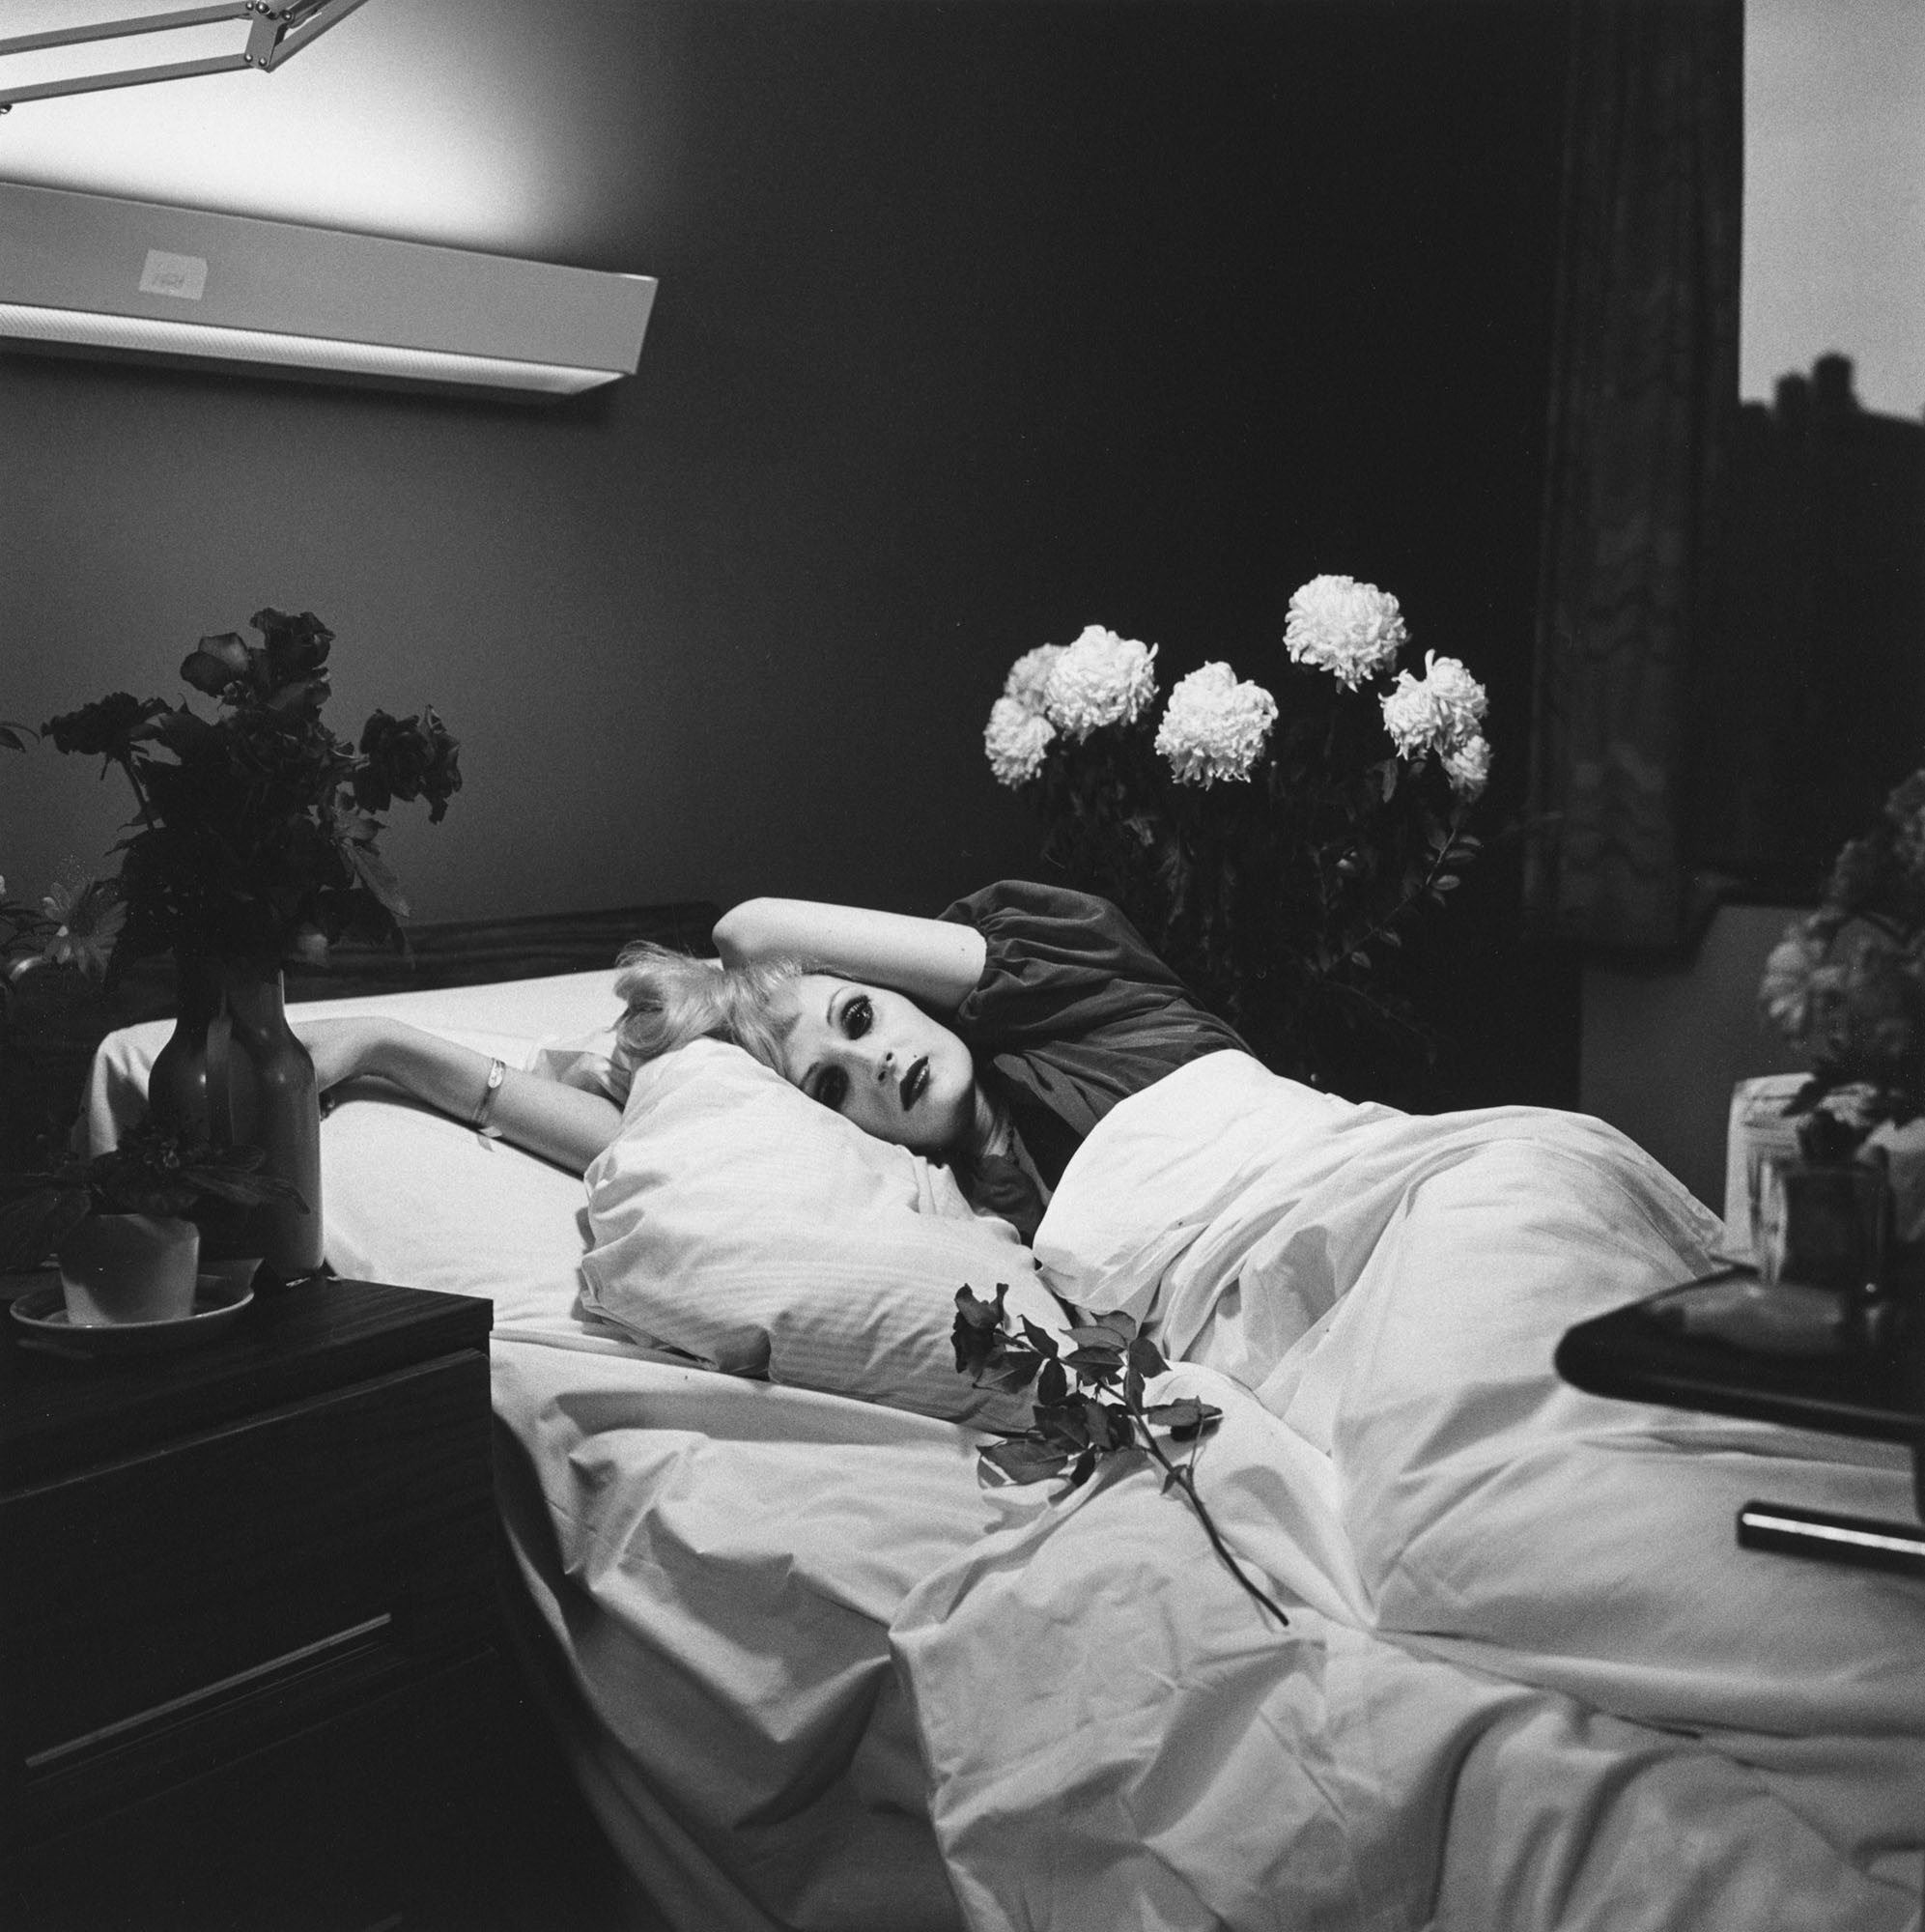 Peter Hujar, Candy Darling on her Deathbed (1974)